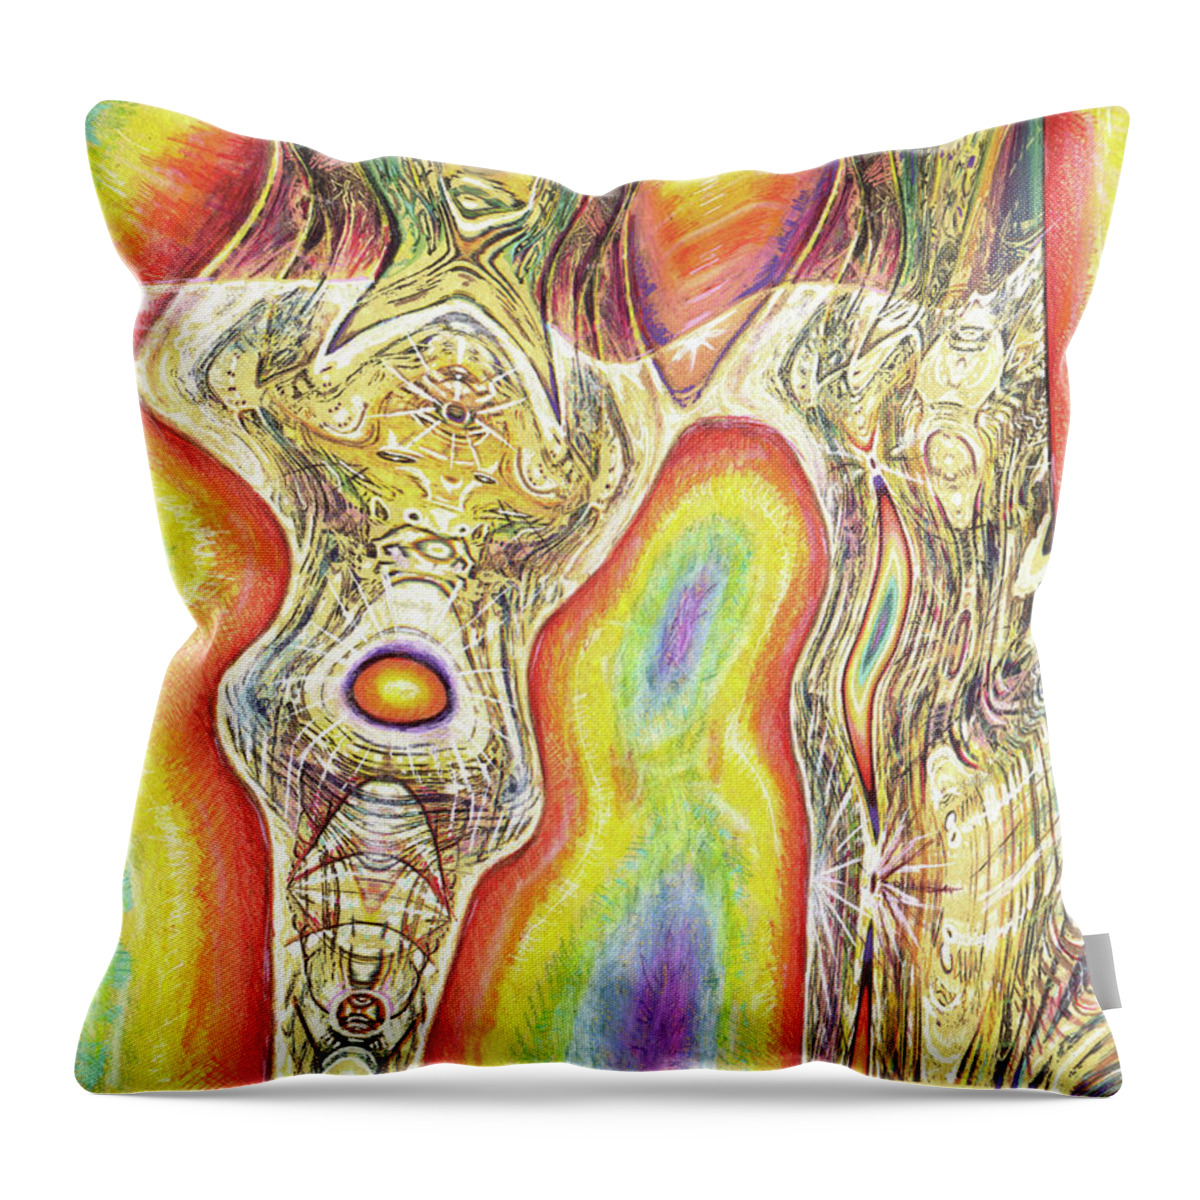 Collage Throw Pillow featuring the painting Juice by Jeremy Robinson